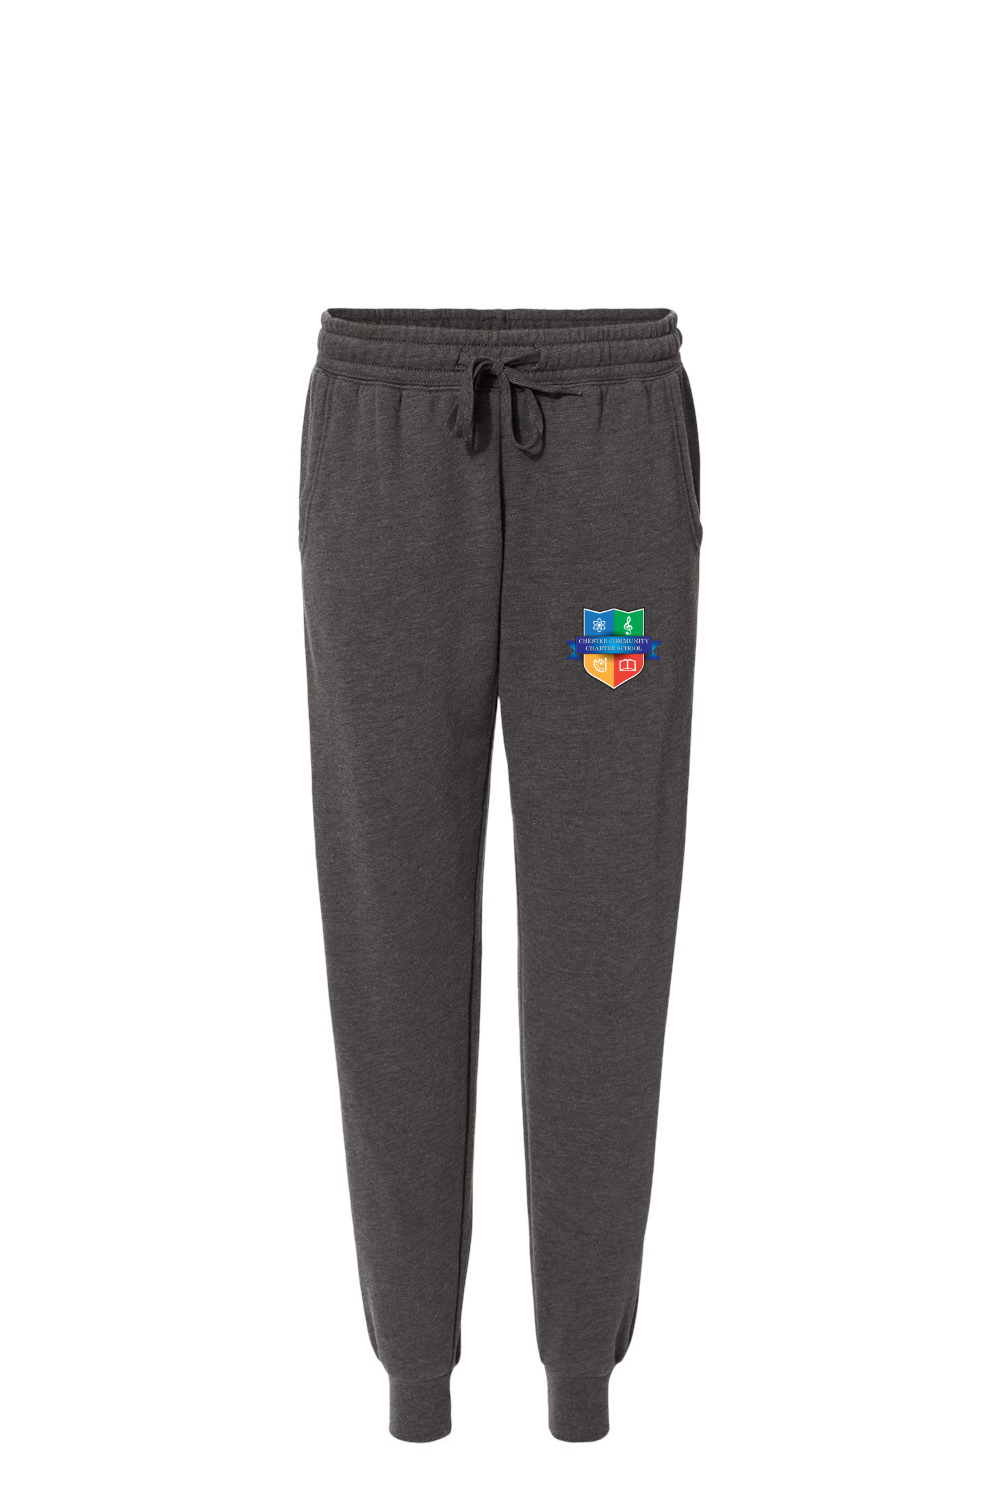 CCCS Logo Independent Trading Co. Women's California Wave Wash Sweatpants